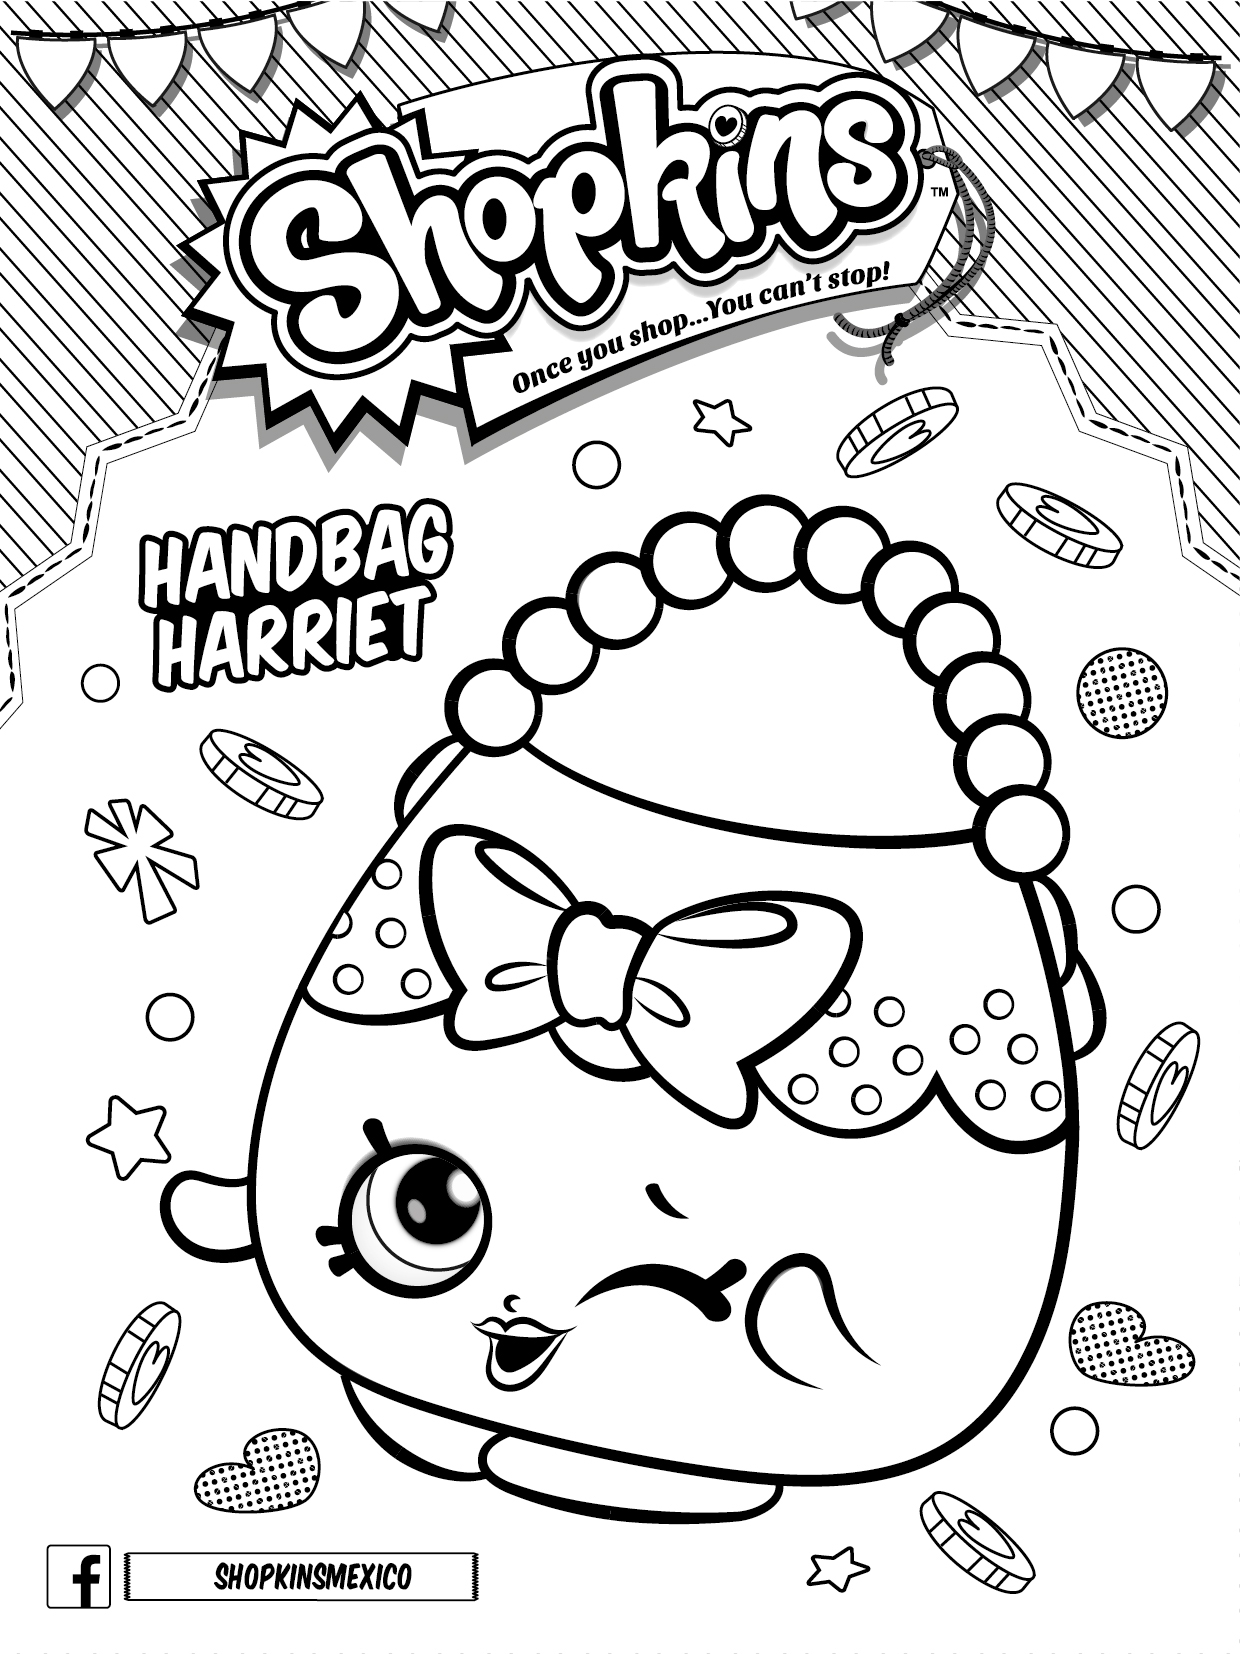 Shopkins Characters Coloring Pages at GetDrawings | Free download